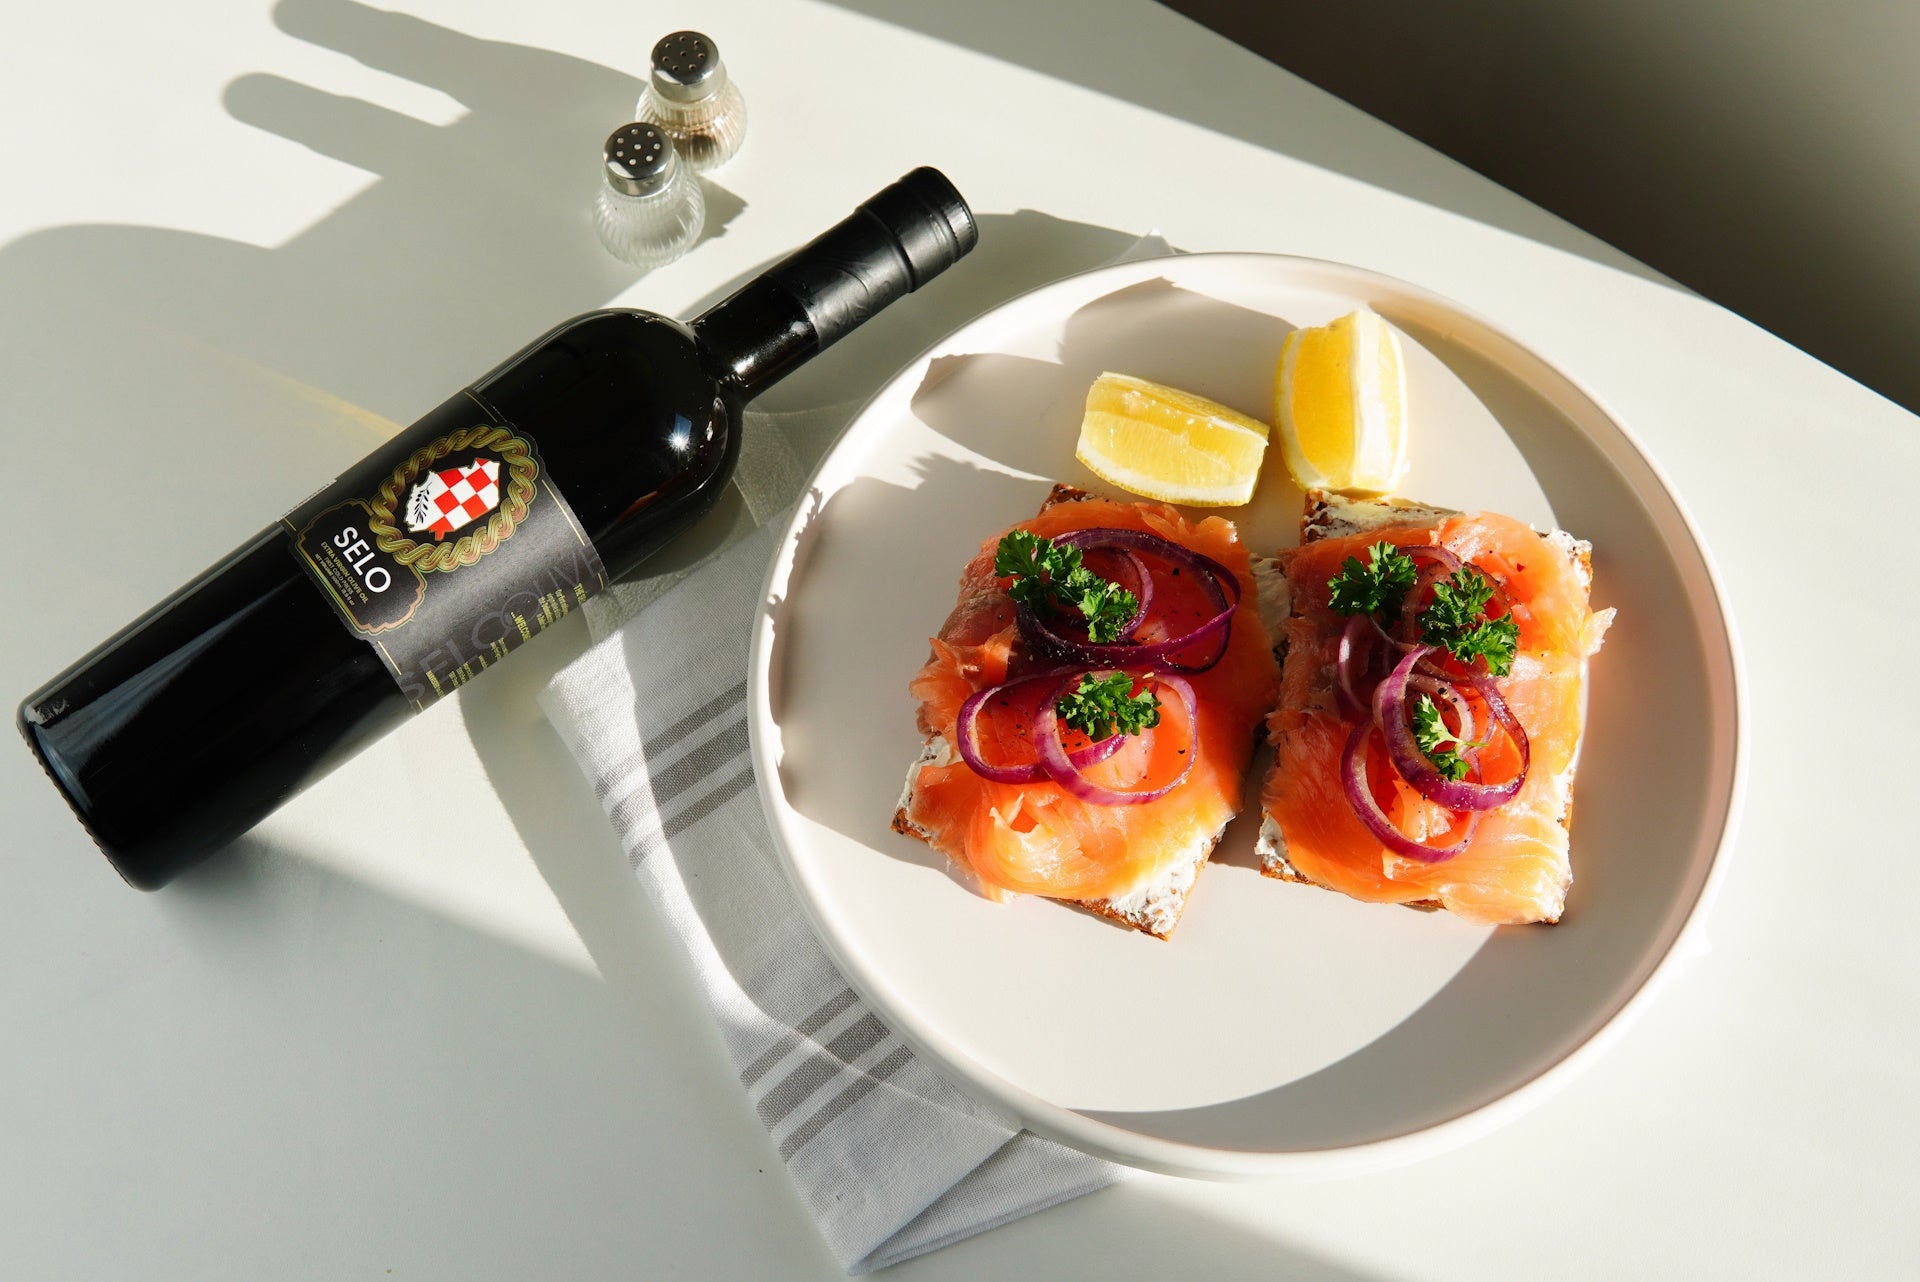 Delicate smoked salmon served with crisp crackers and tangy red onion, complemented by Croatian olive oil.